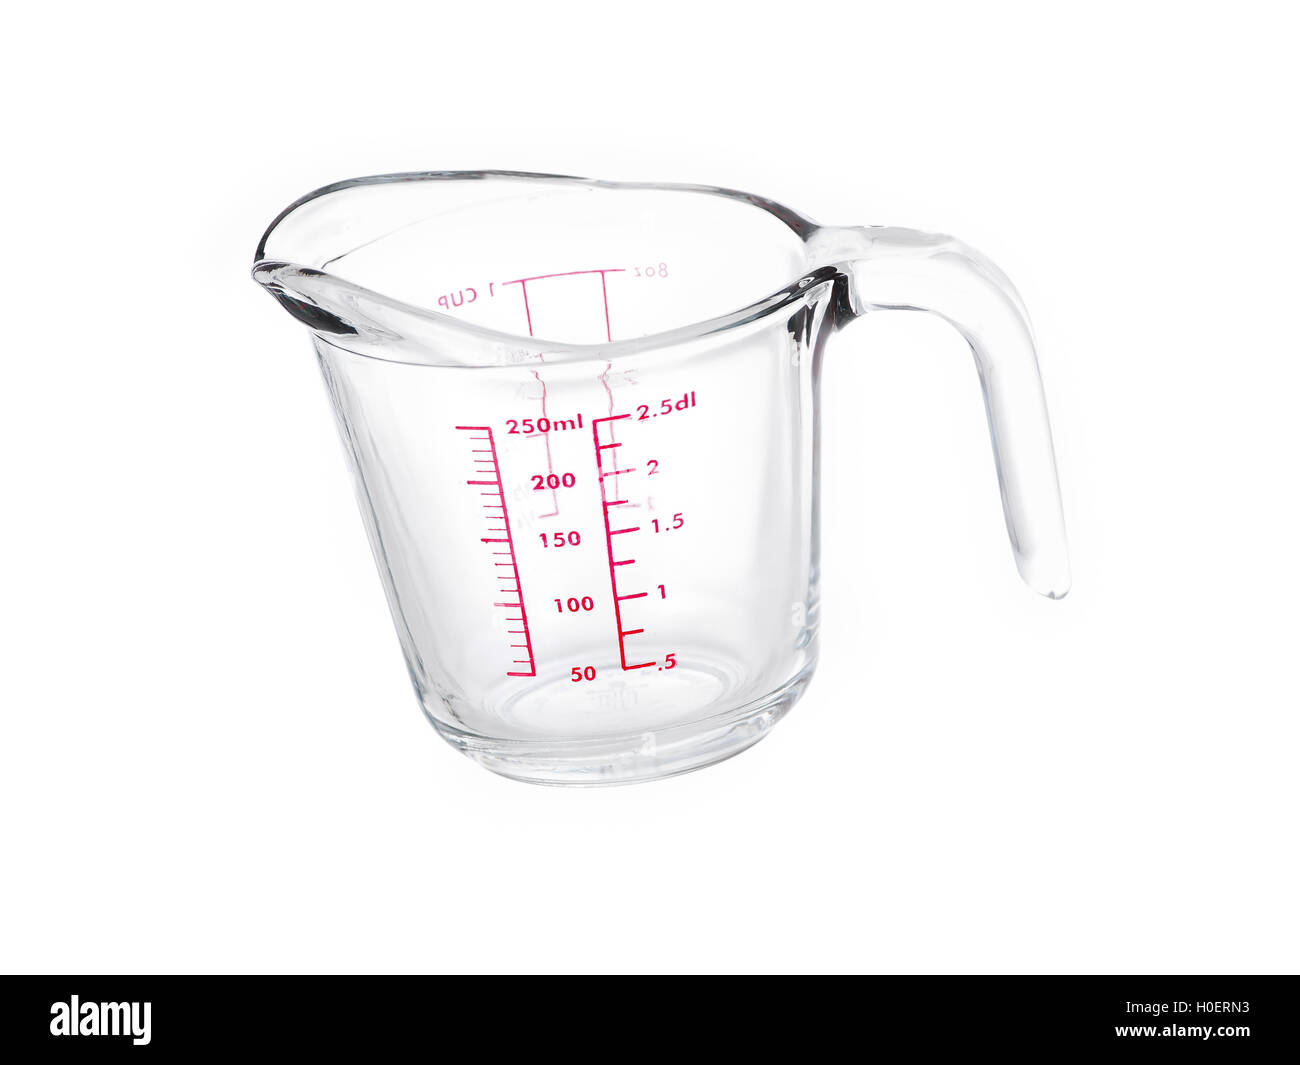 Glass mesuring cup on pure white background Stock Photo